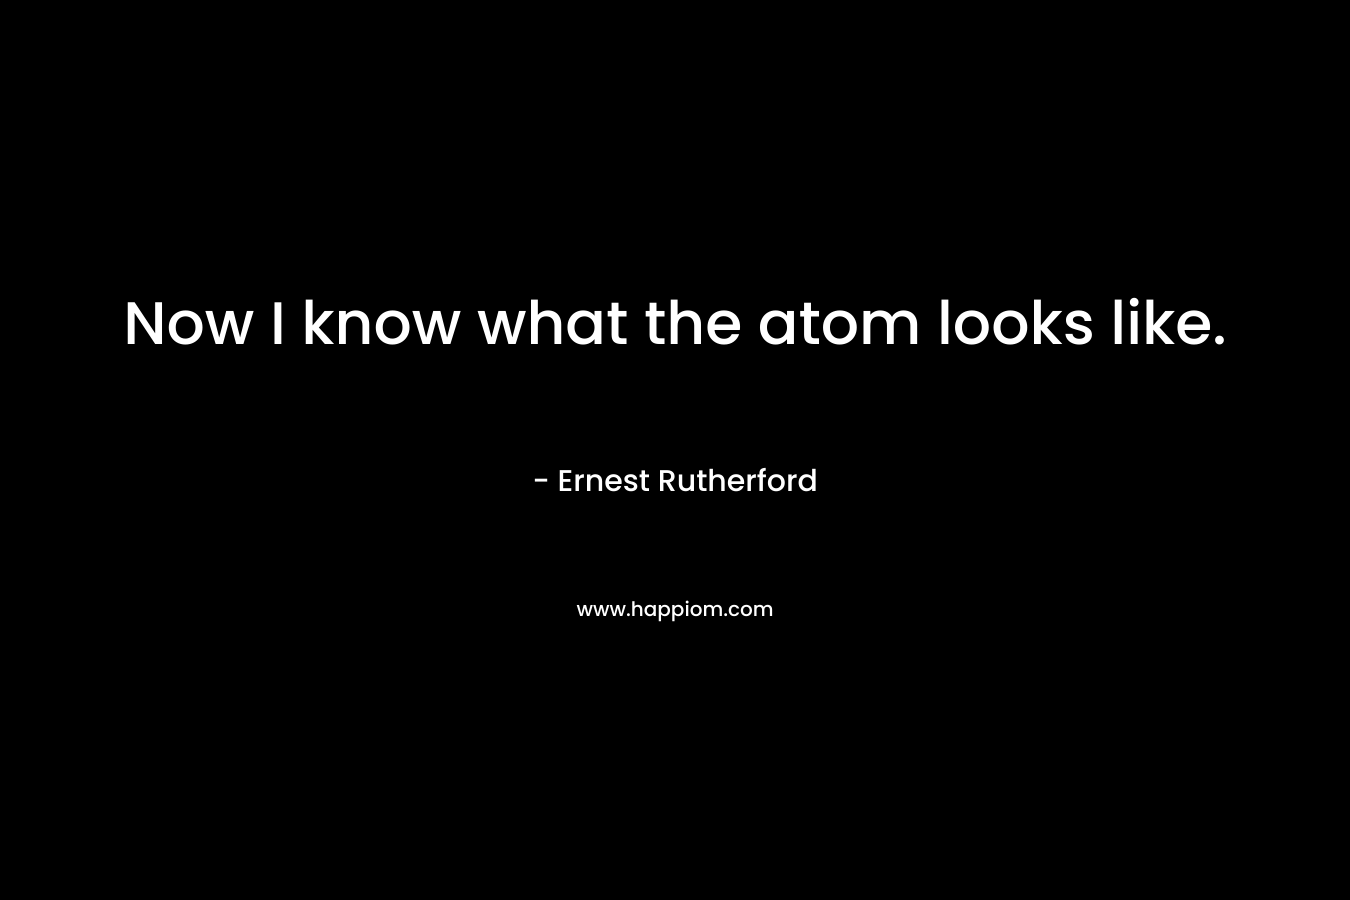 Now I know what the atom looks like. – Ernest Rutherford